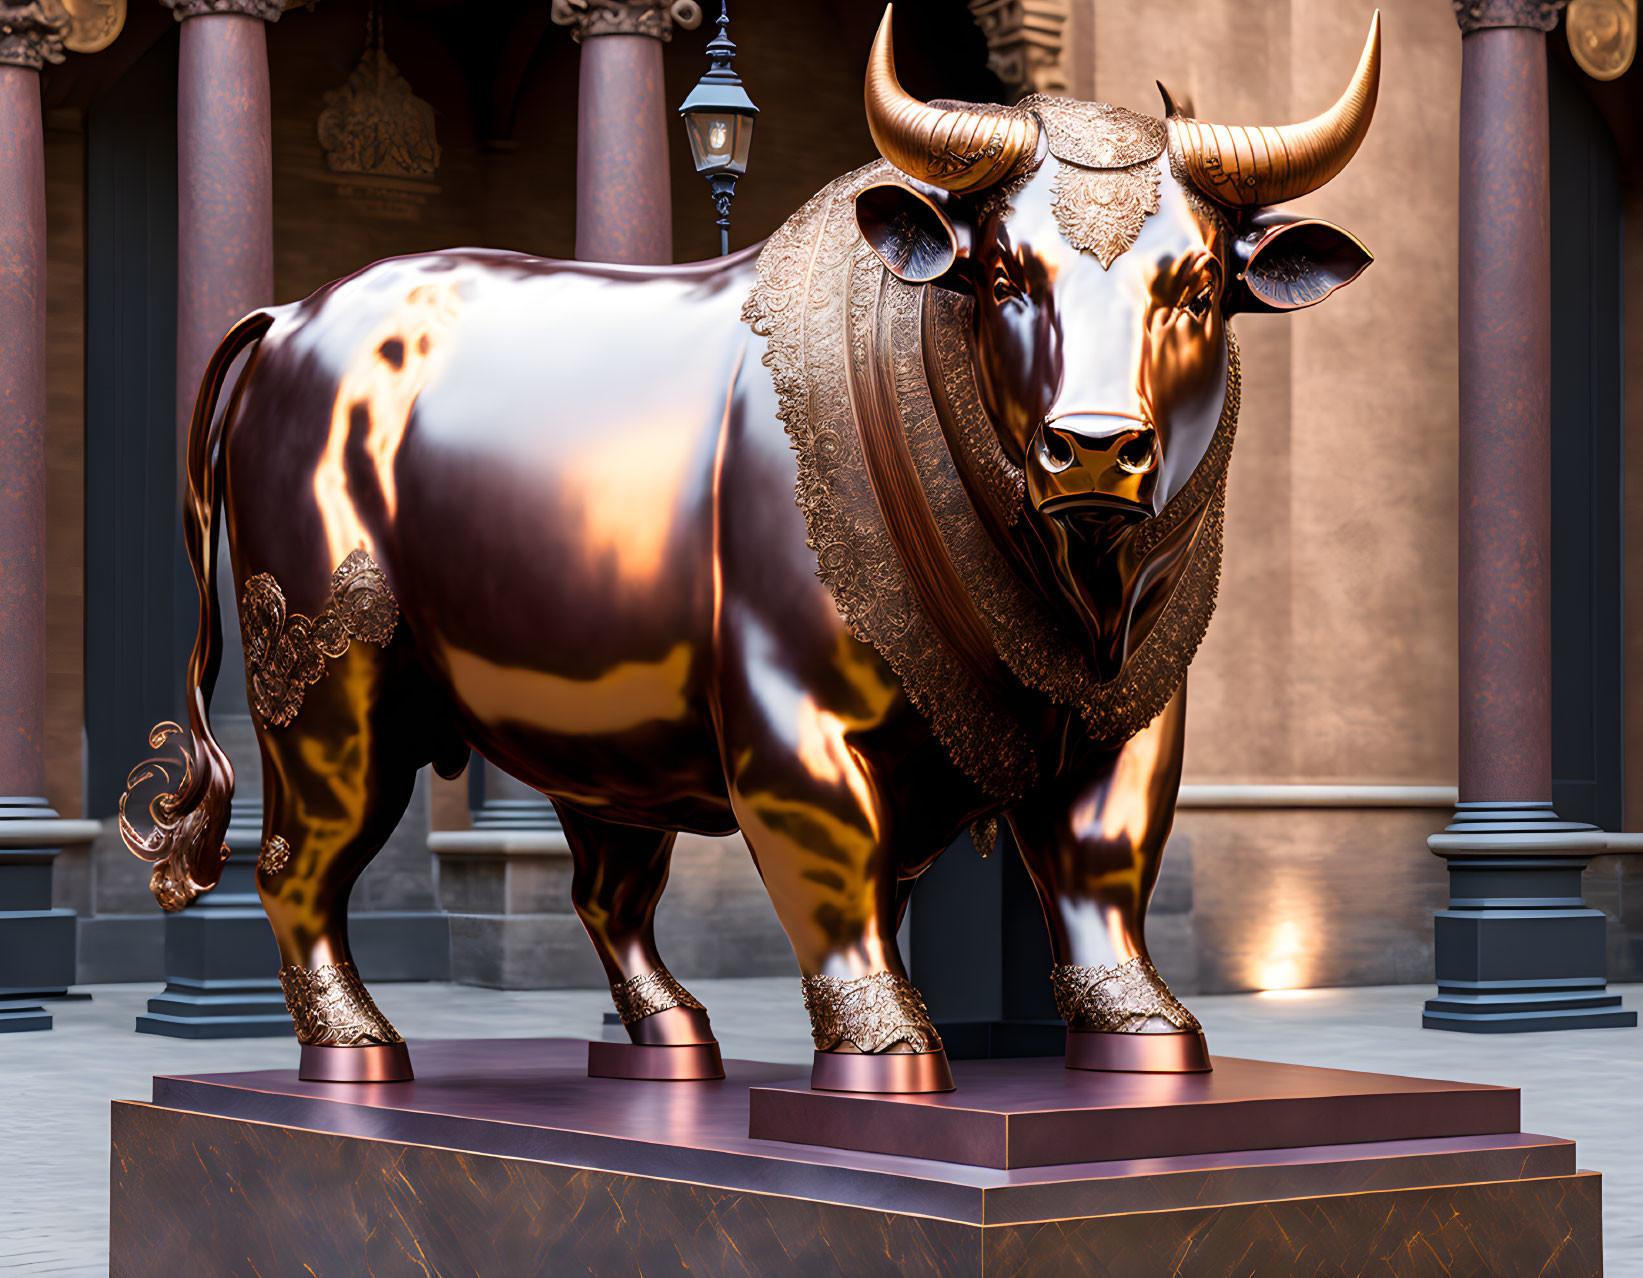 Shiny metallic bull statue with gold embellishments in grand hall